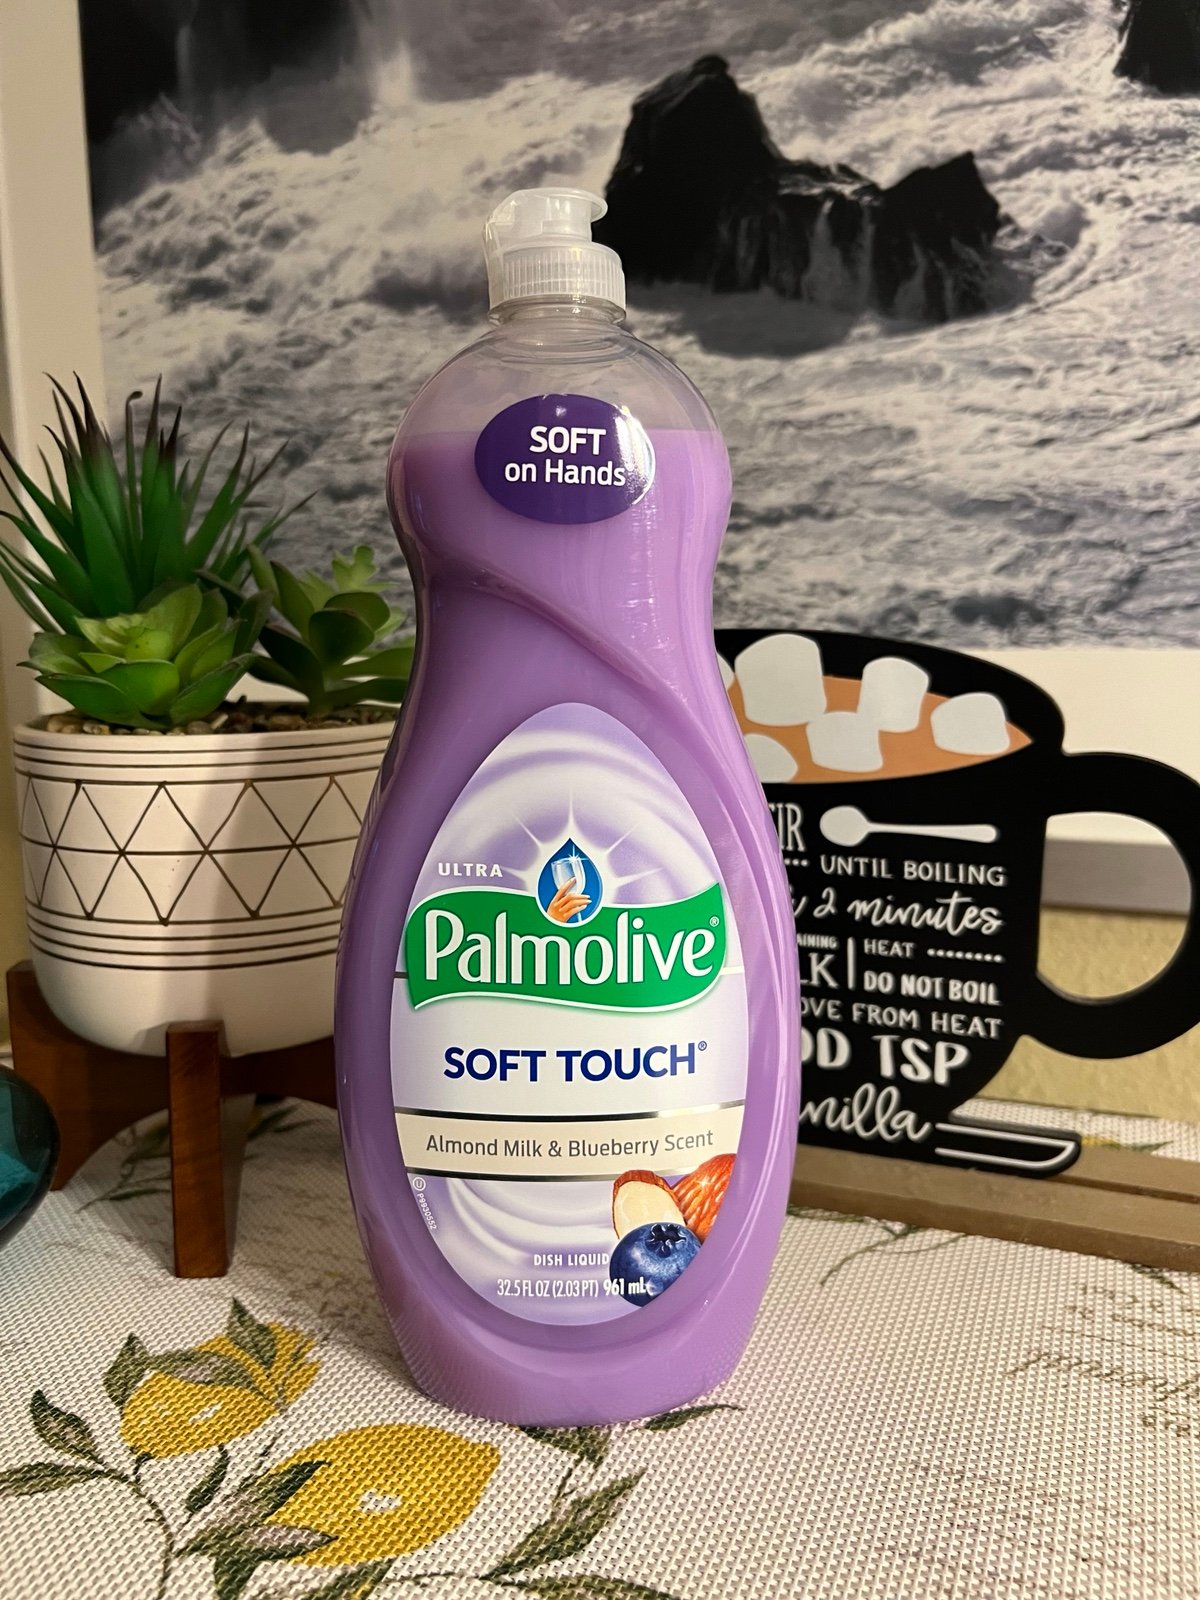 One Palmolive Soft Touch Almond Milk & Blueberry Dish L